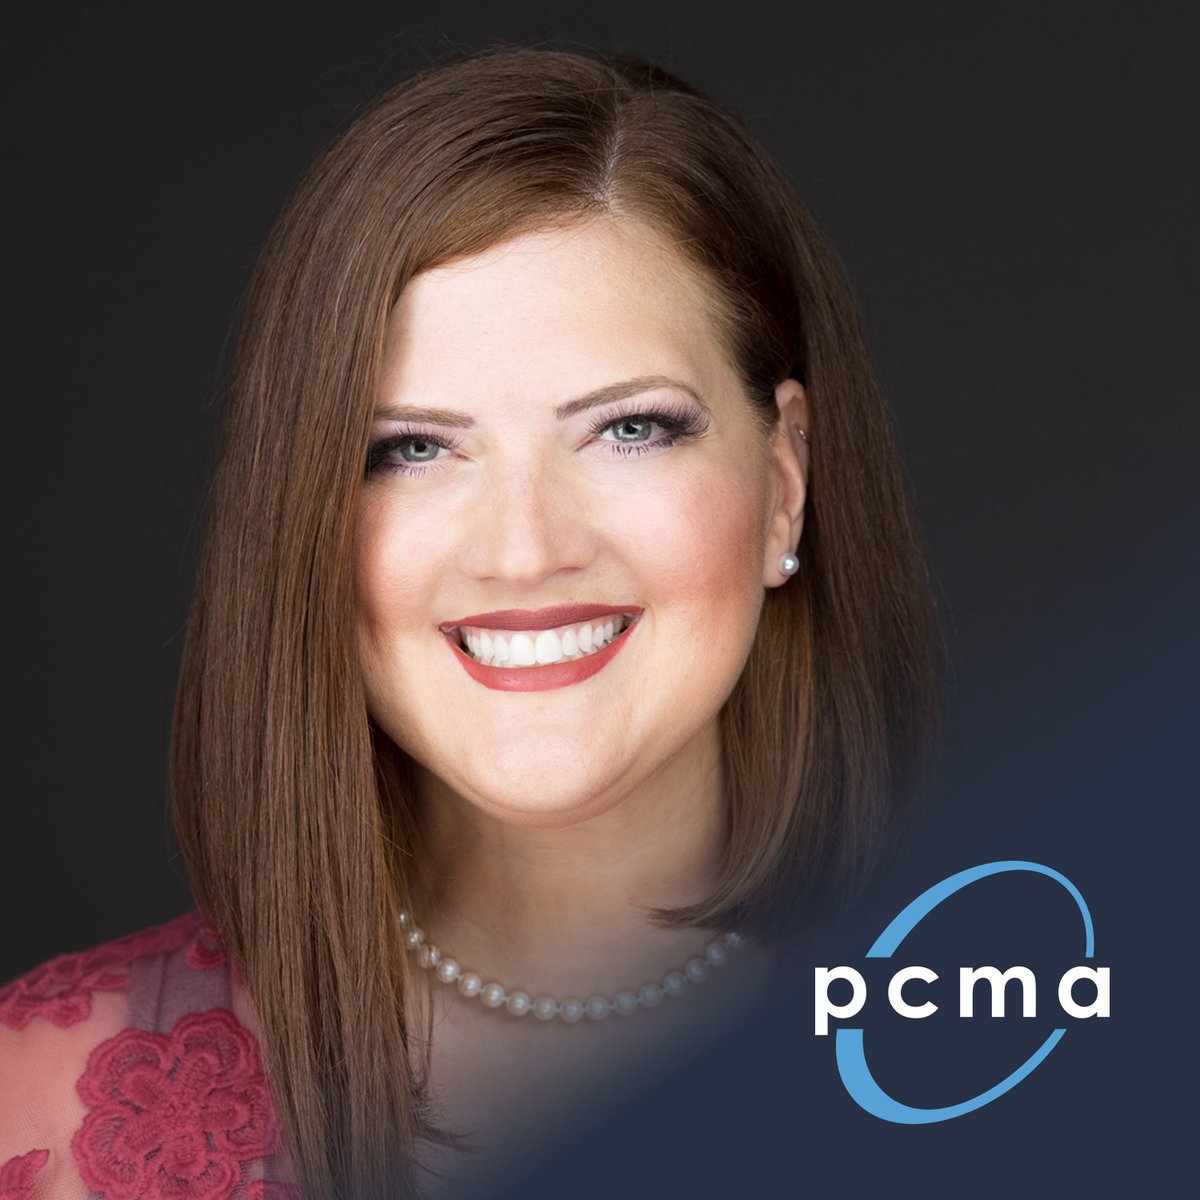 PCMA is thrilled to welcome Traci DePuy as its Chief Marketing Officer! In this new role, DePuy will lead the enterprise-wide brand and marketing strategies, including PCMA’s brand as the platform for the global business events industry. pcma.co/3MKbo19 #PCMA